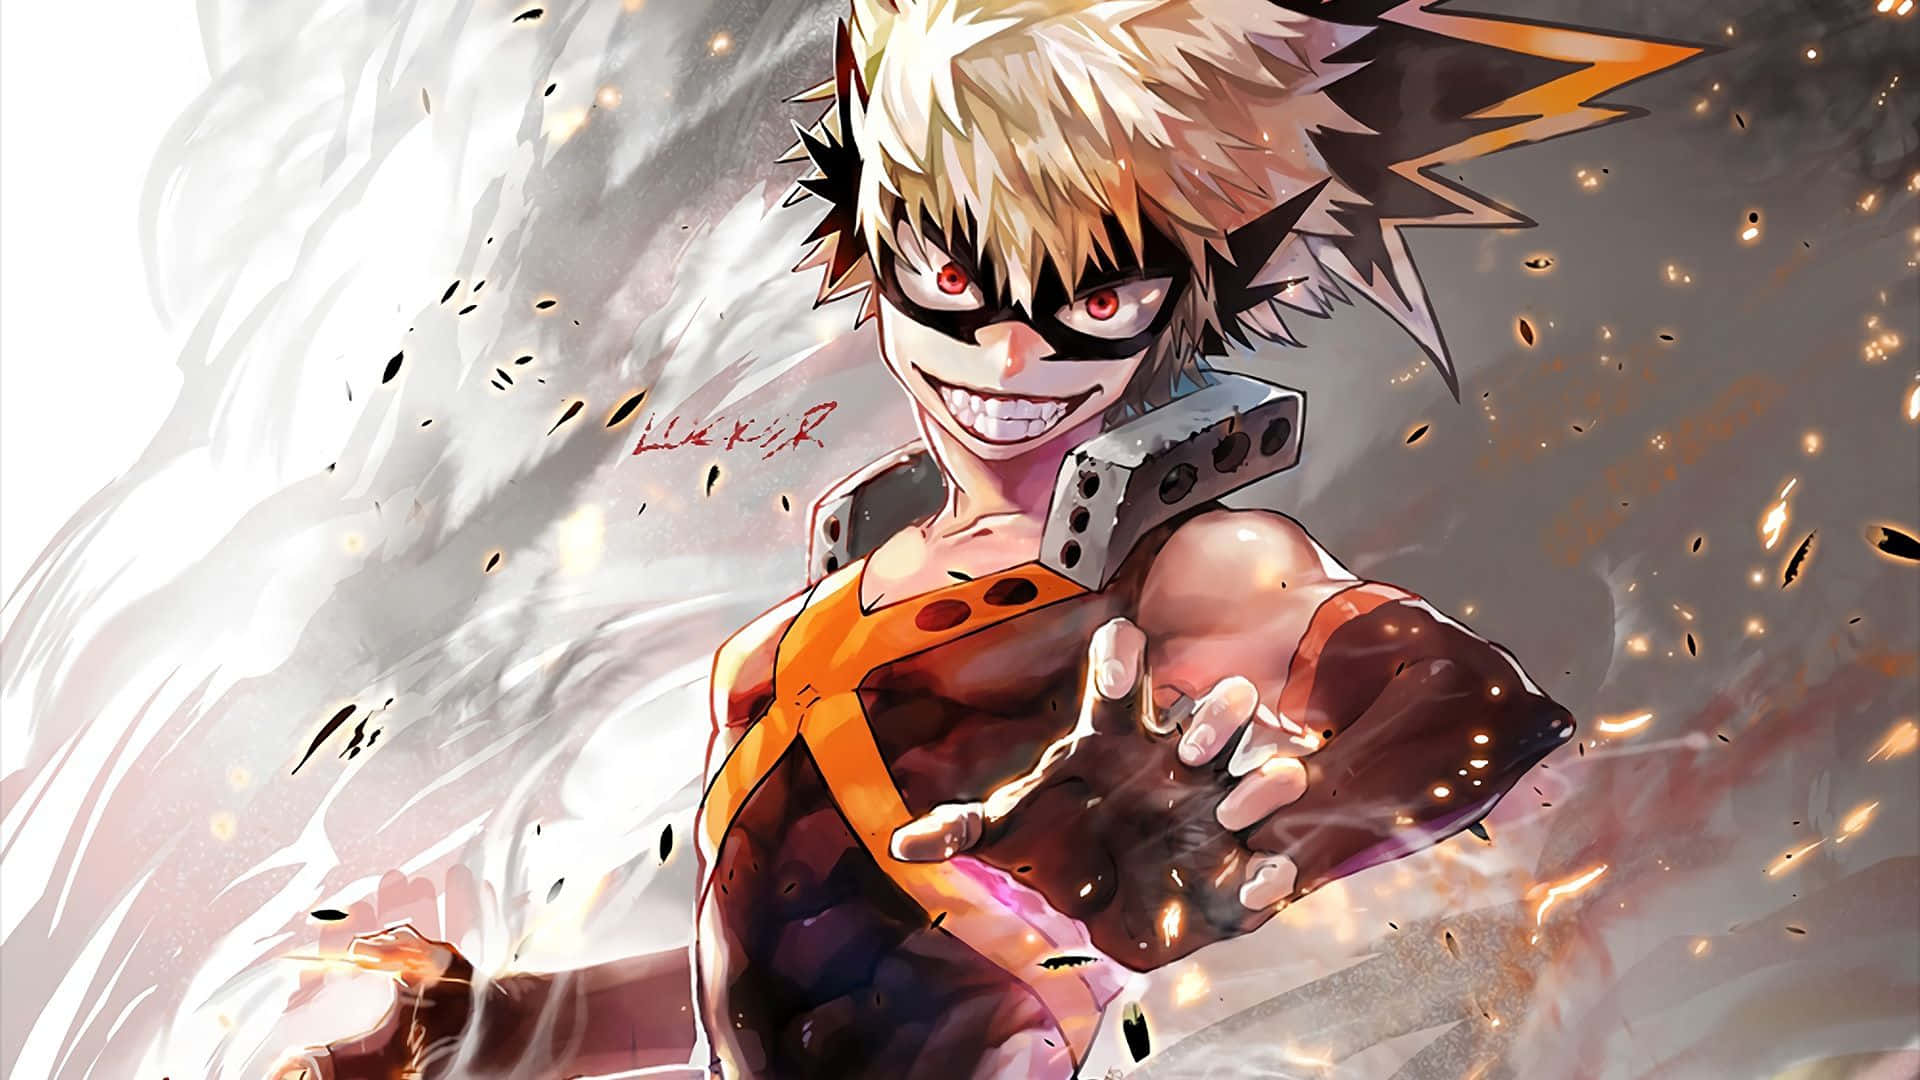 Bakugo unleashes his explosive power in a stunning visual